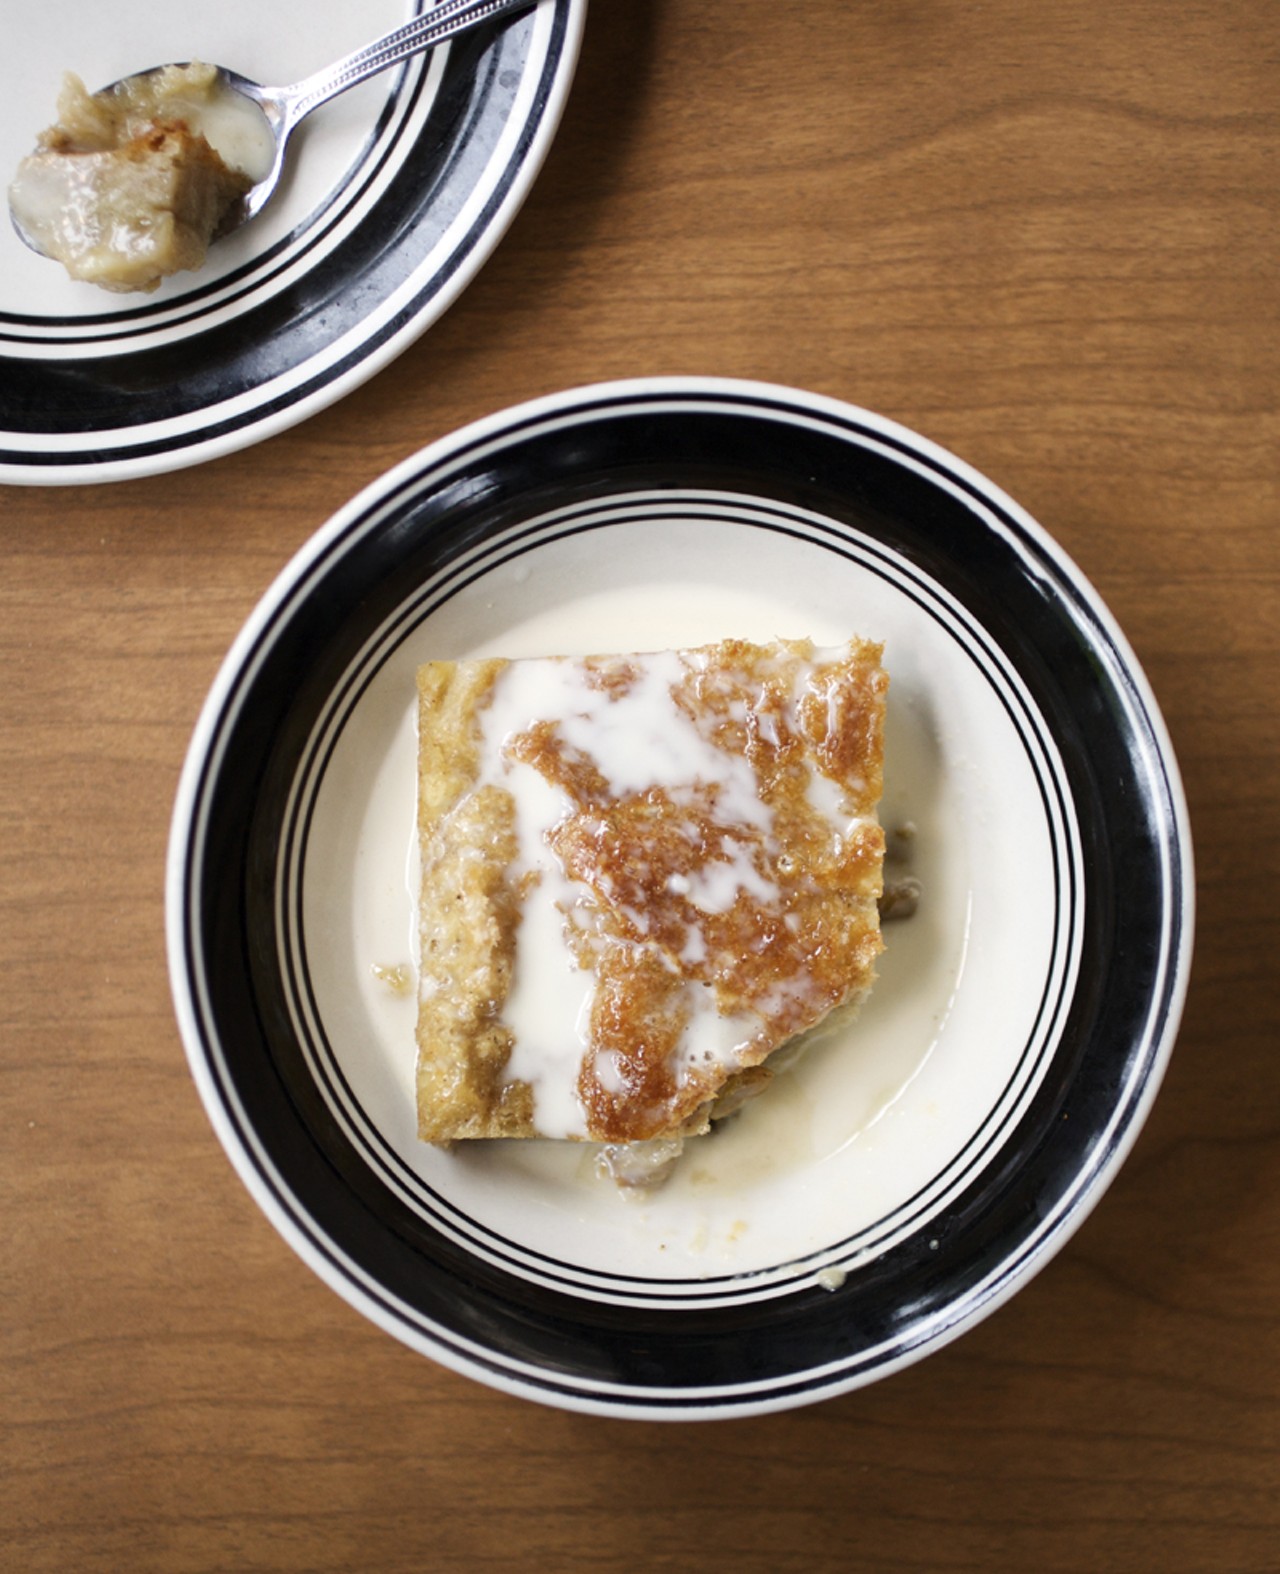 Creole Bread Pudding with Whiskey Sauce.